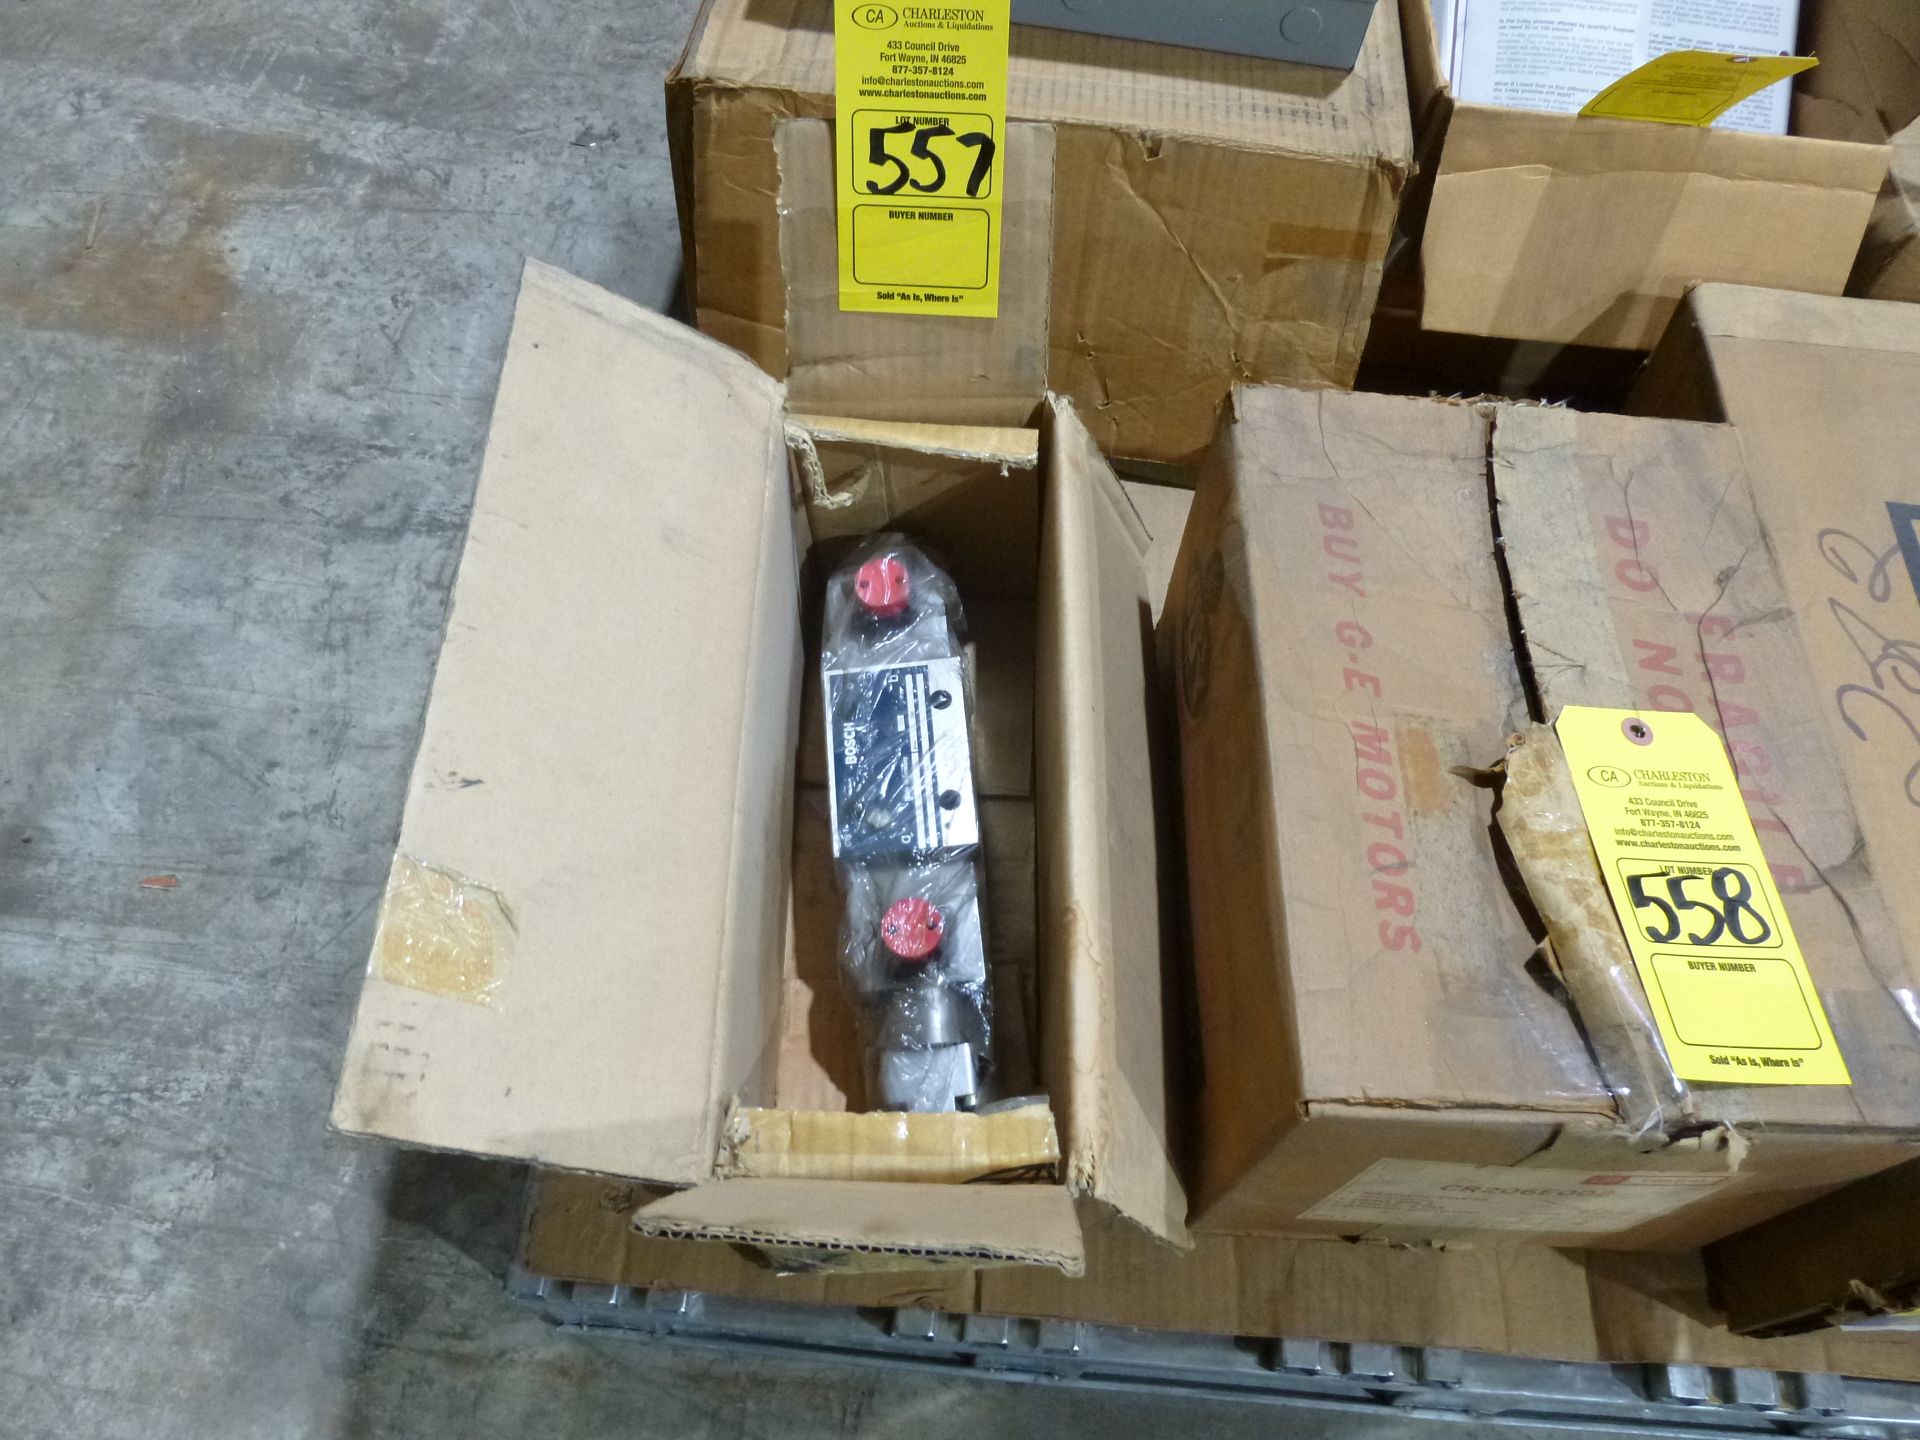 Bosch valve part number 0811404001, new as pictured, as always with Brolyn LLC auctions, all lots